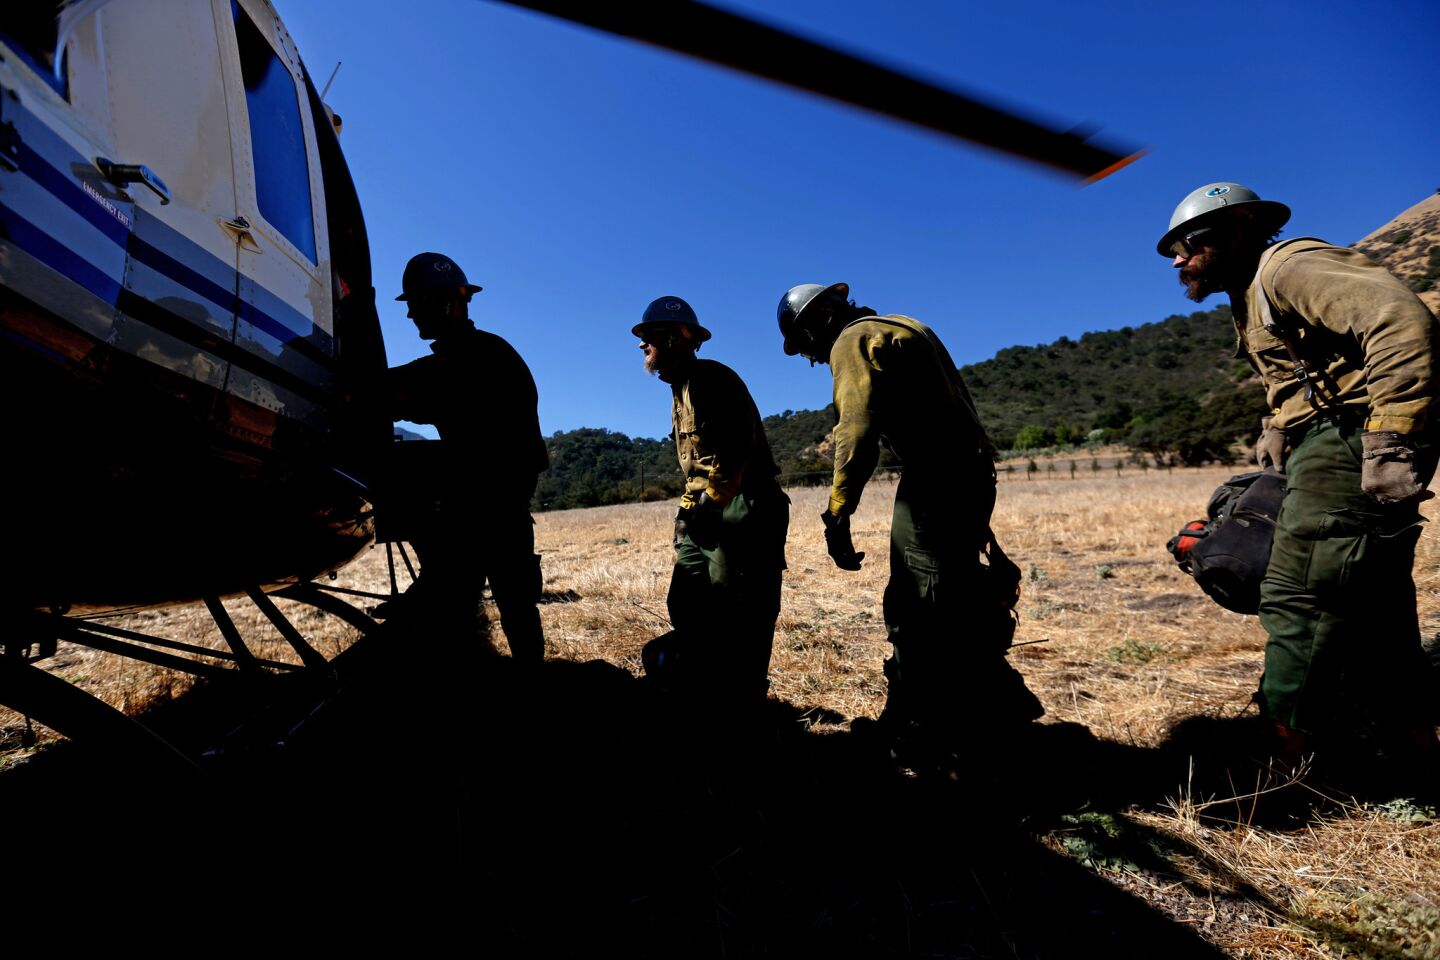 The U.S. Forest Service Smith River Hotshot Crew is air-lifted by helicopter to battle the Soberanes fire burning in Garrapata State Park in the Los Padres National Forest.